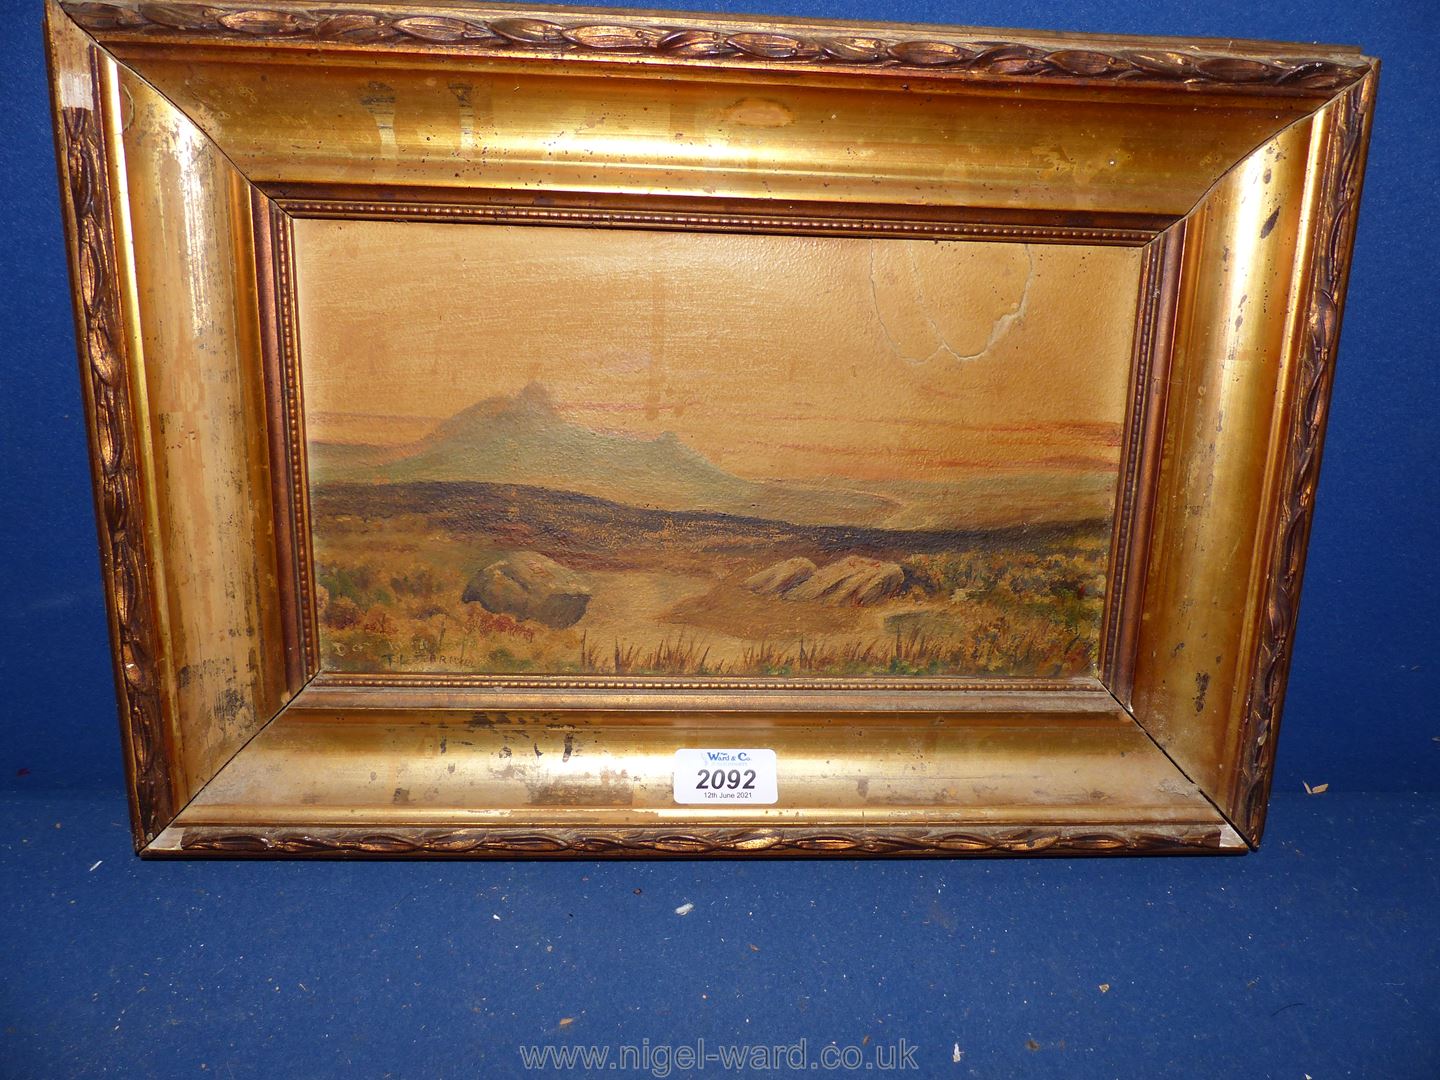 An early 20th c. Oil painting of Dartmoor scene, signed.